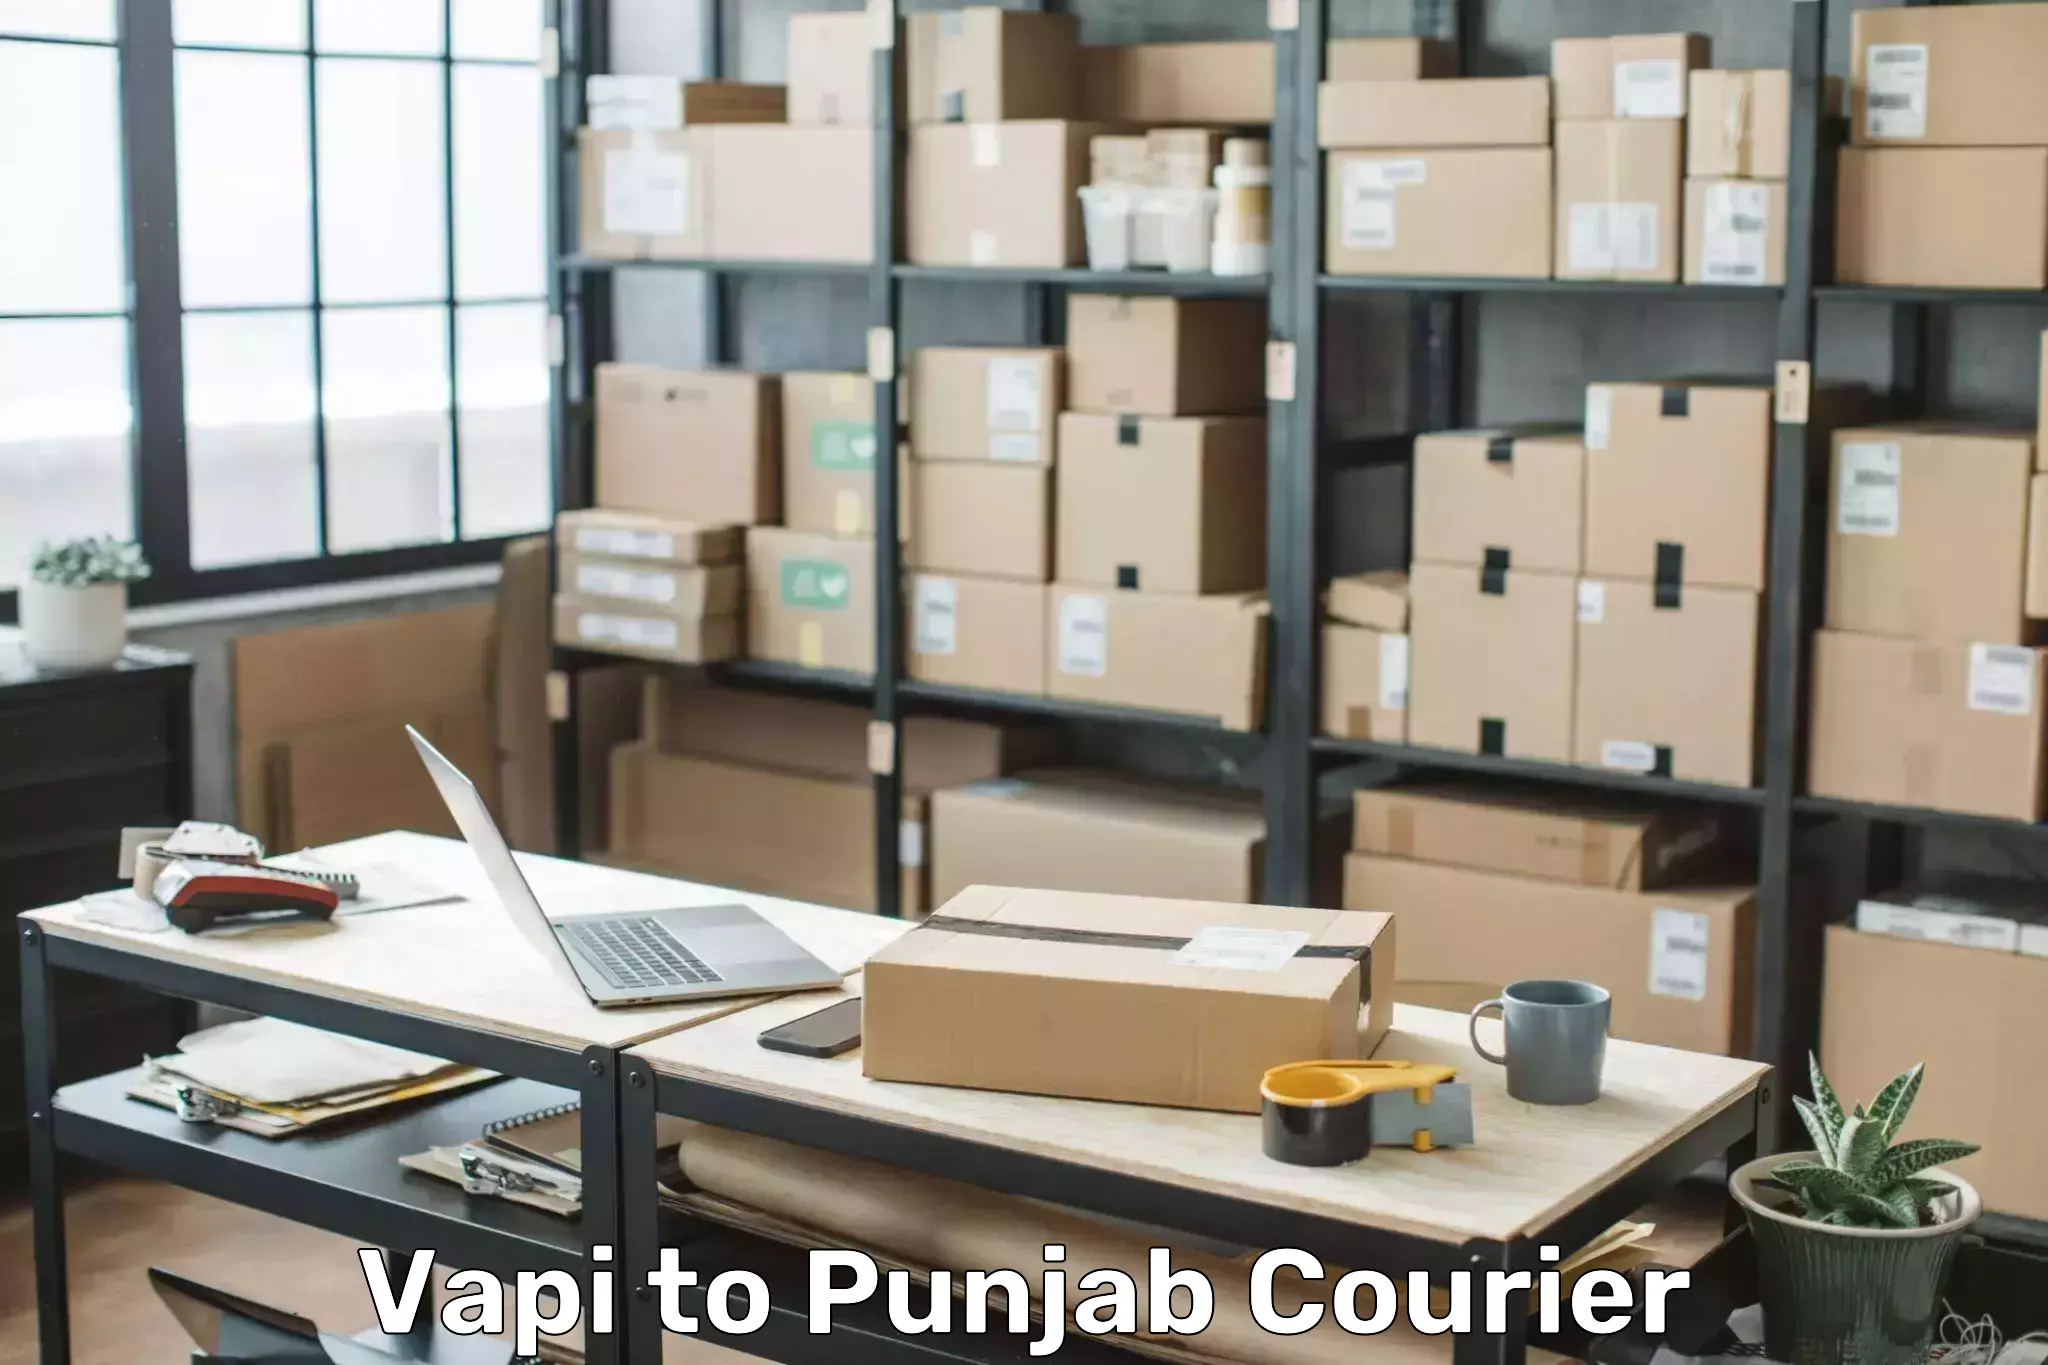 Airport luggage delivery Vapi to Mohali